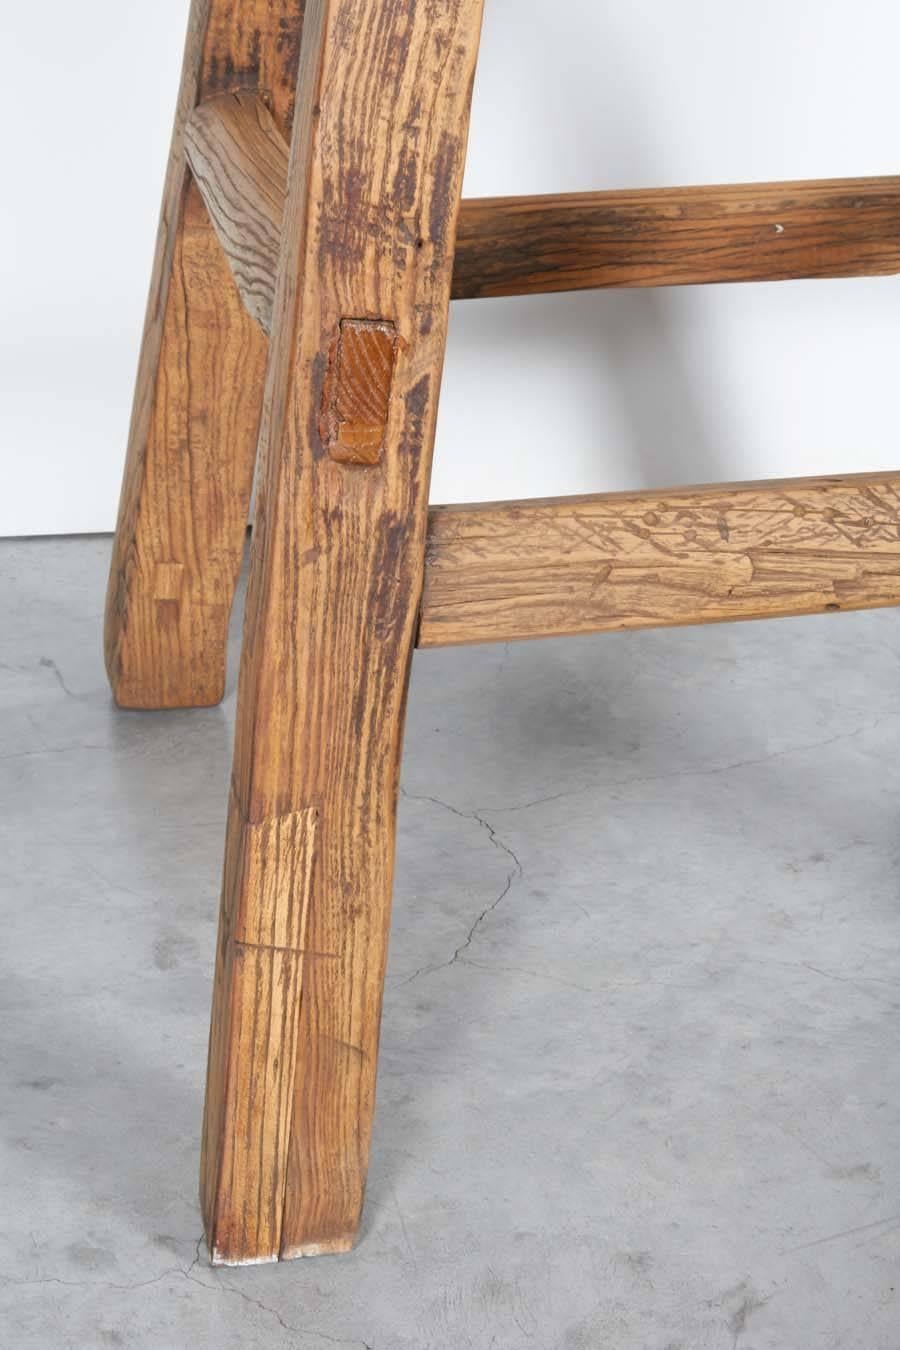 Chinese Tall Rustic Stool or Side Table